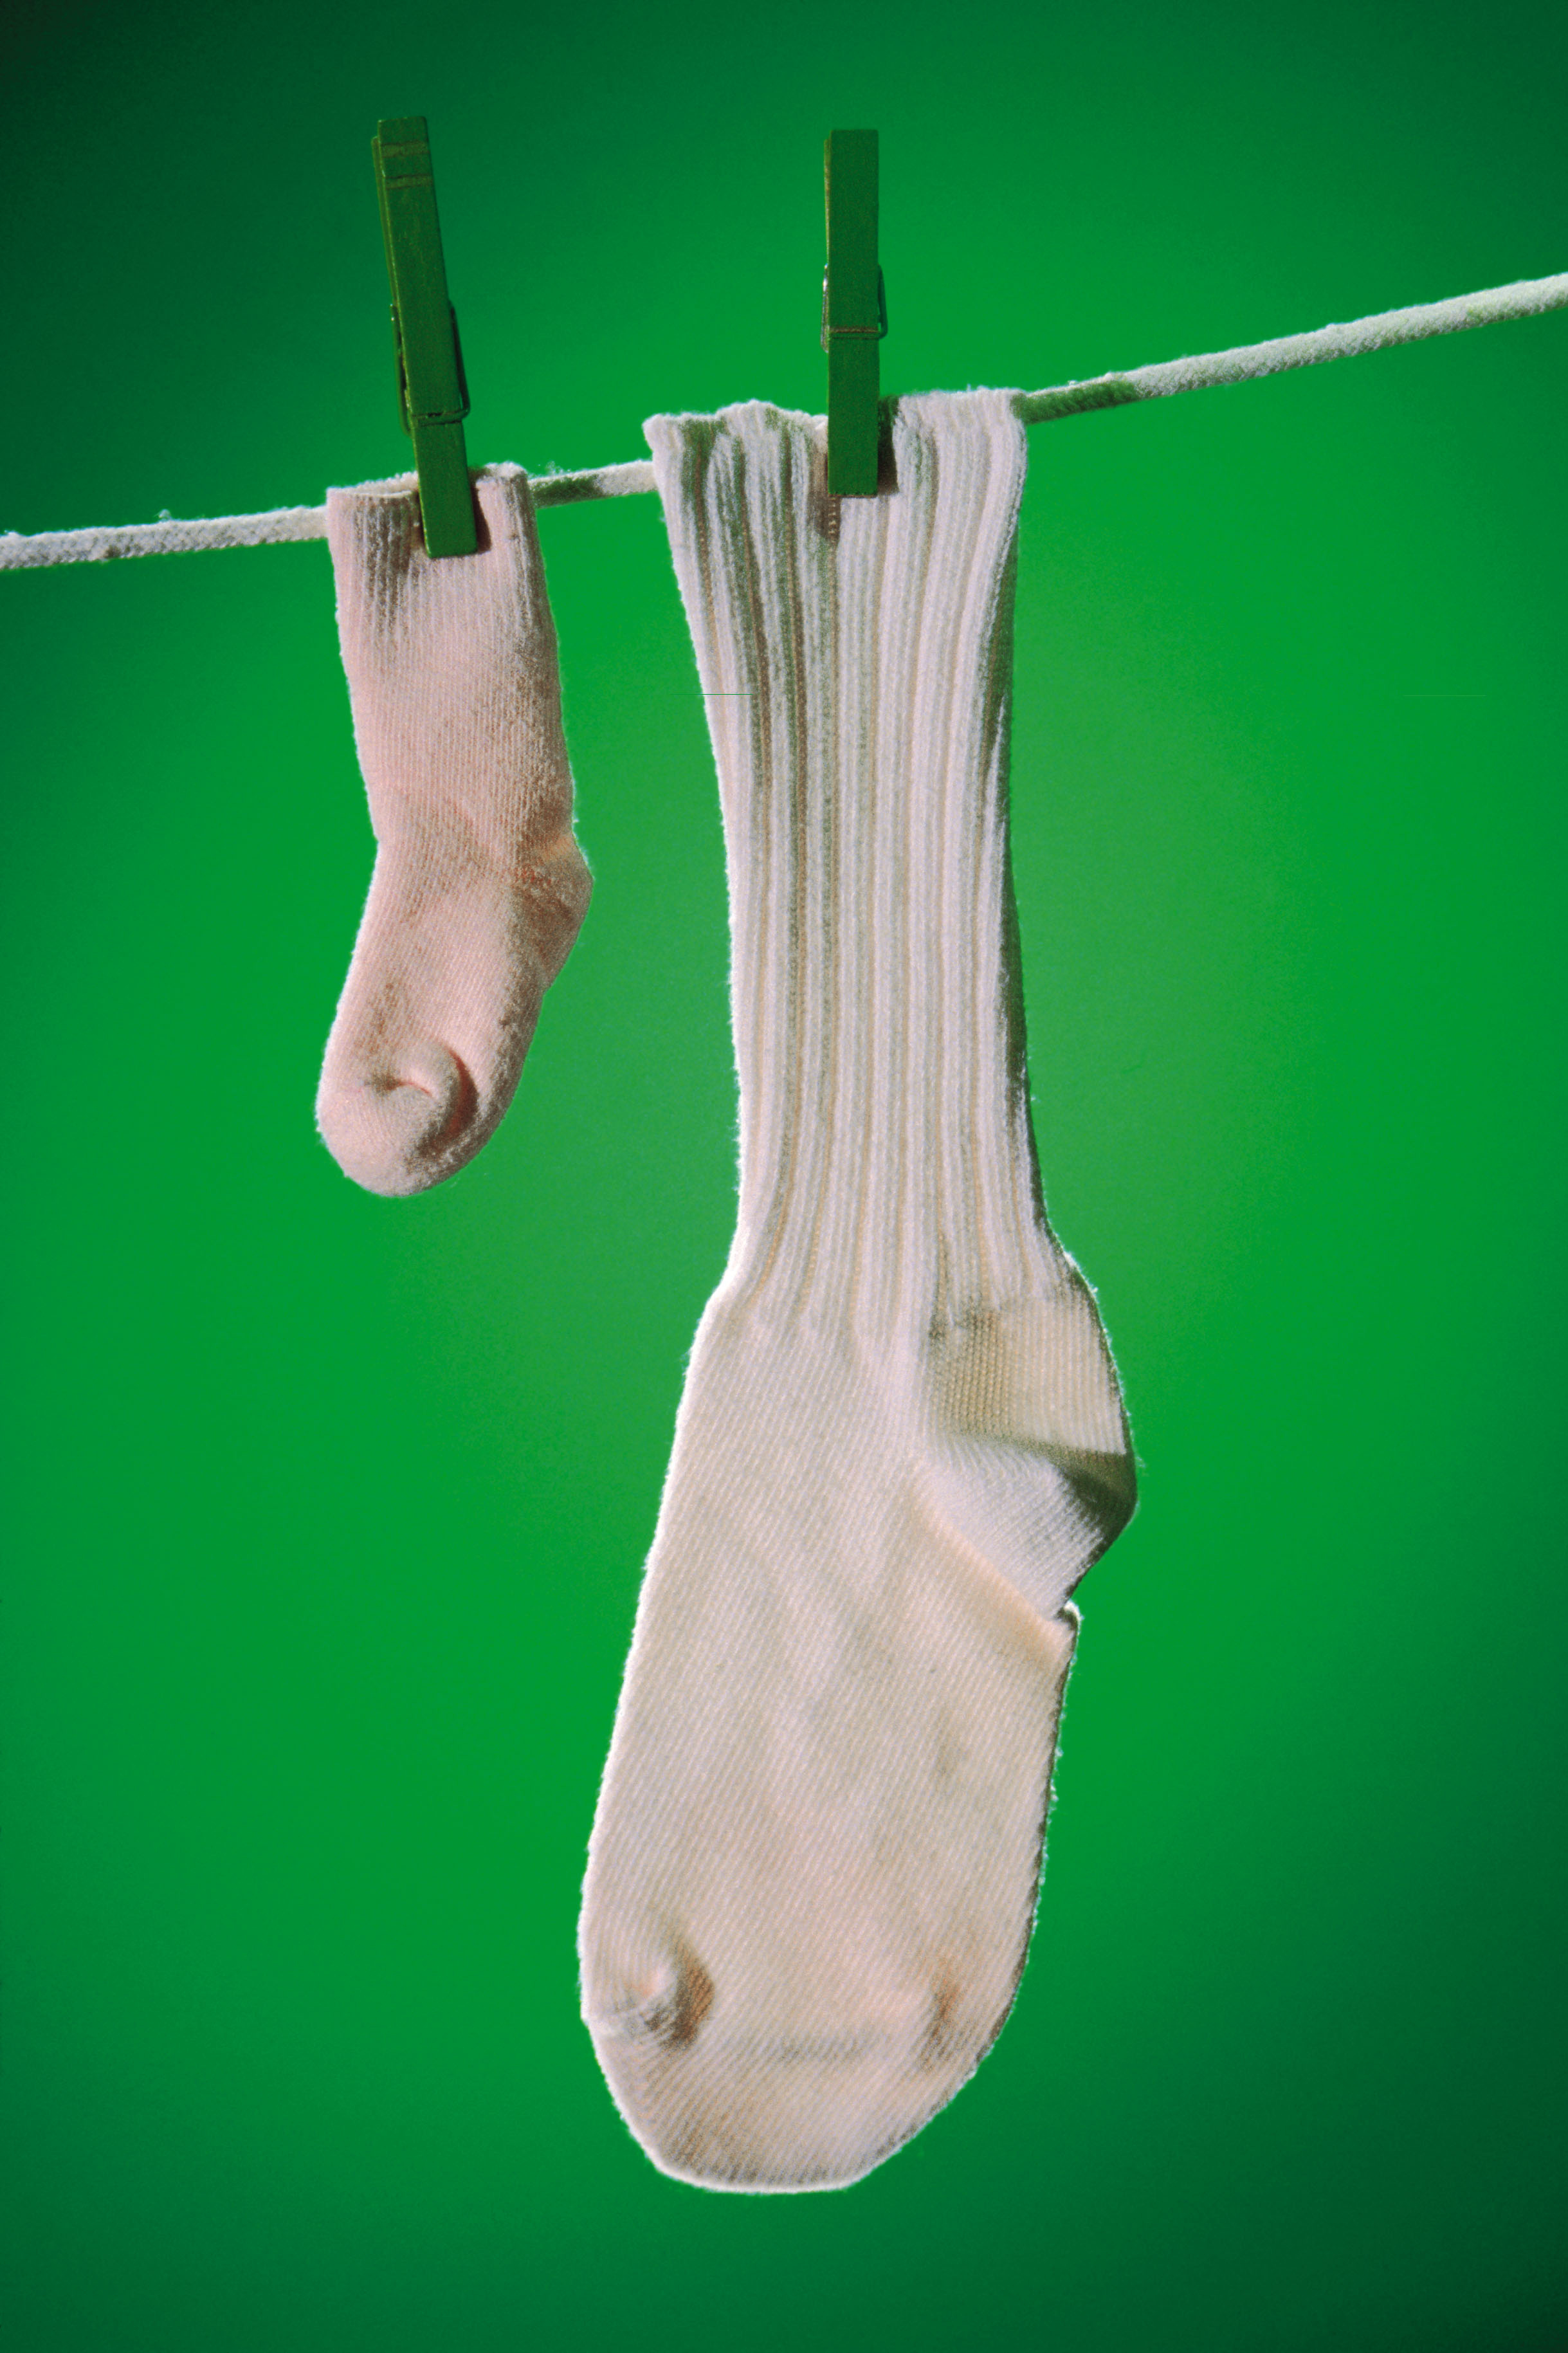 How to Make Socks Not Hard During Laundry